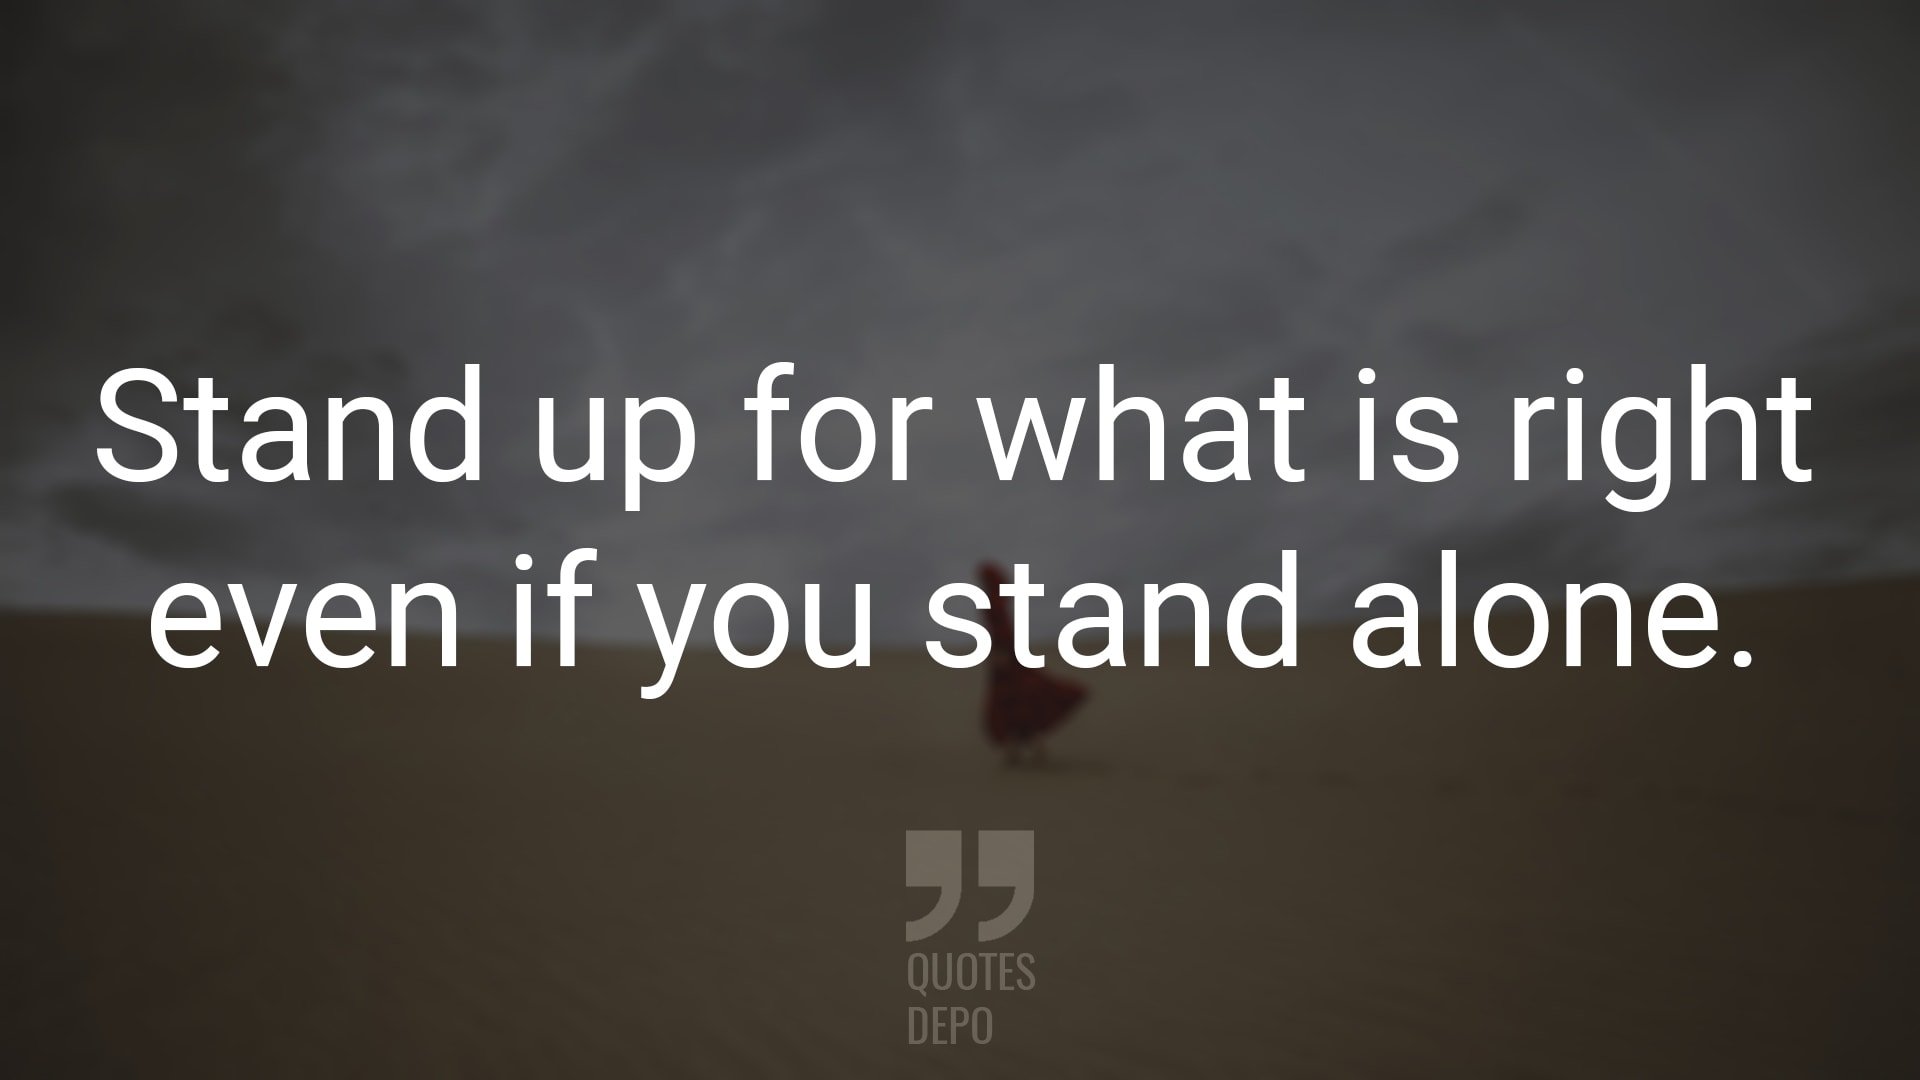 Stand Up for What is Right